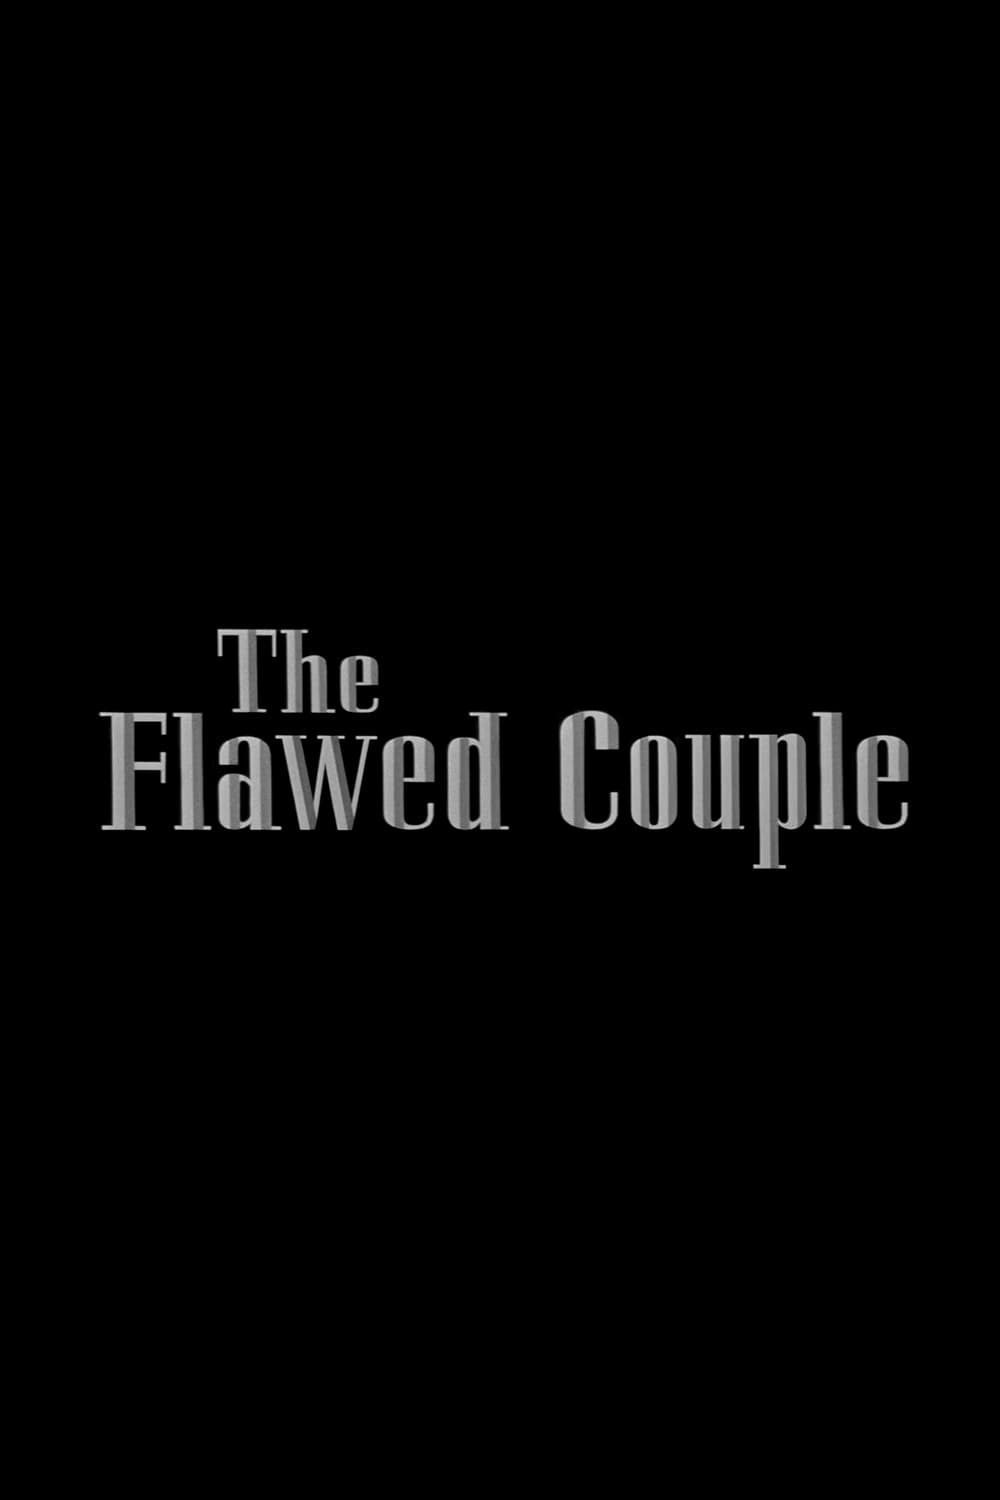 The Flawed Couple